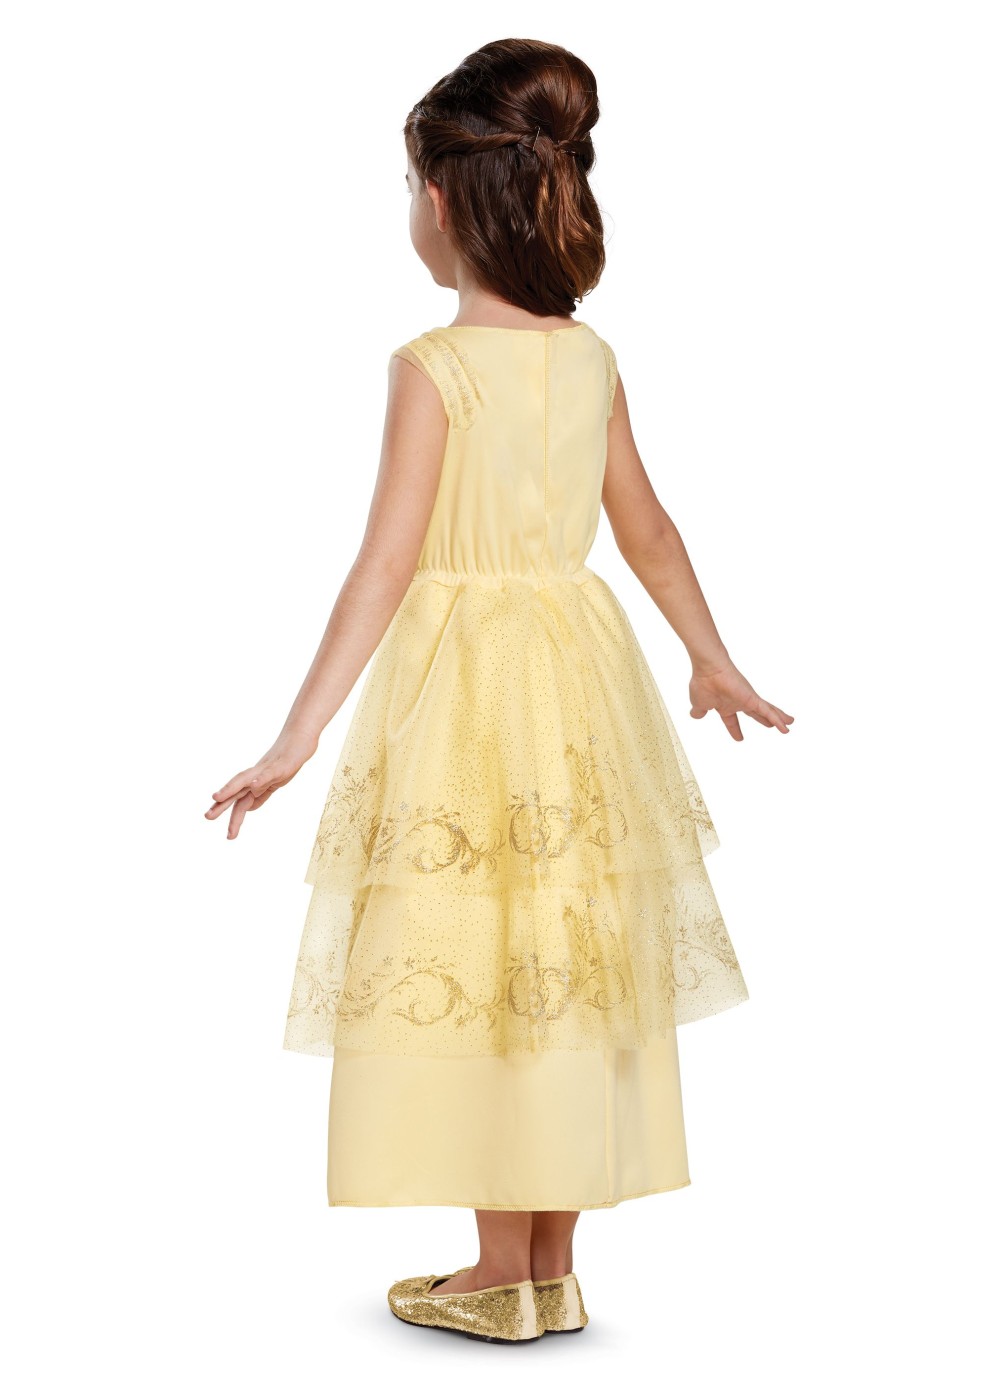 Girls Belle Ball Gown - Princess Costumes